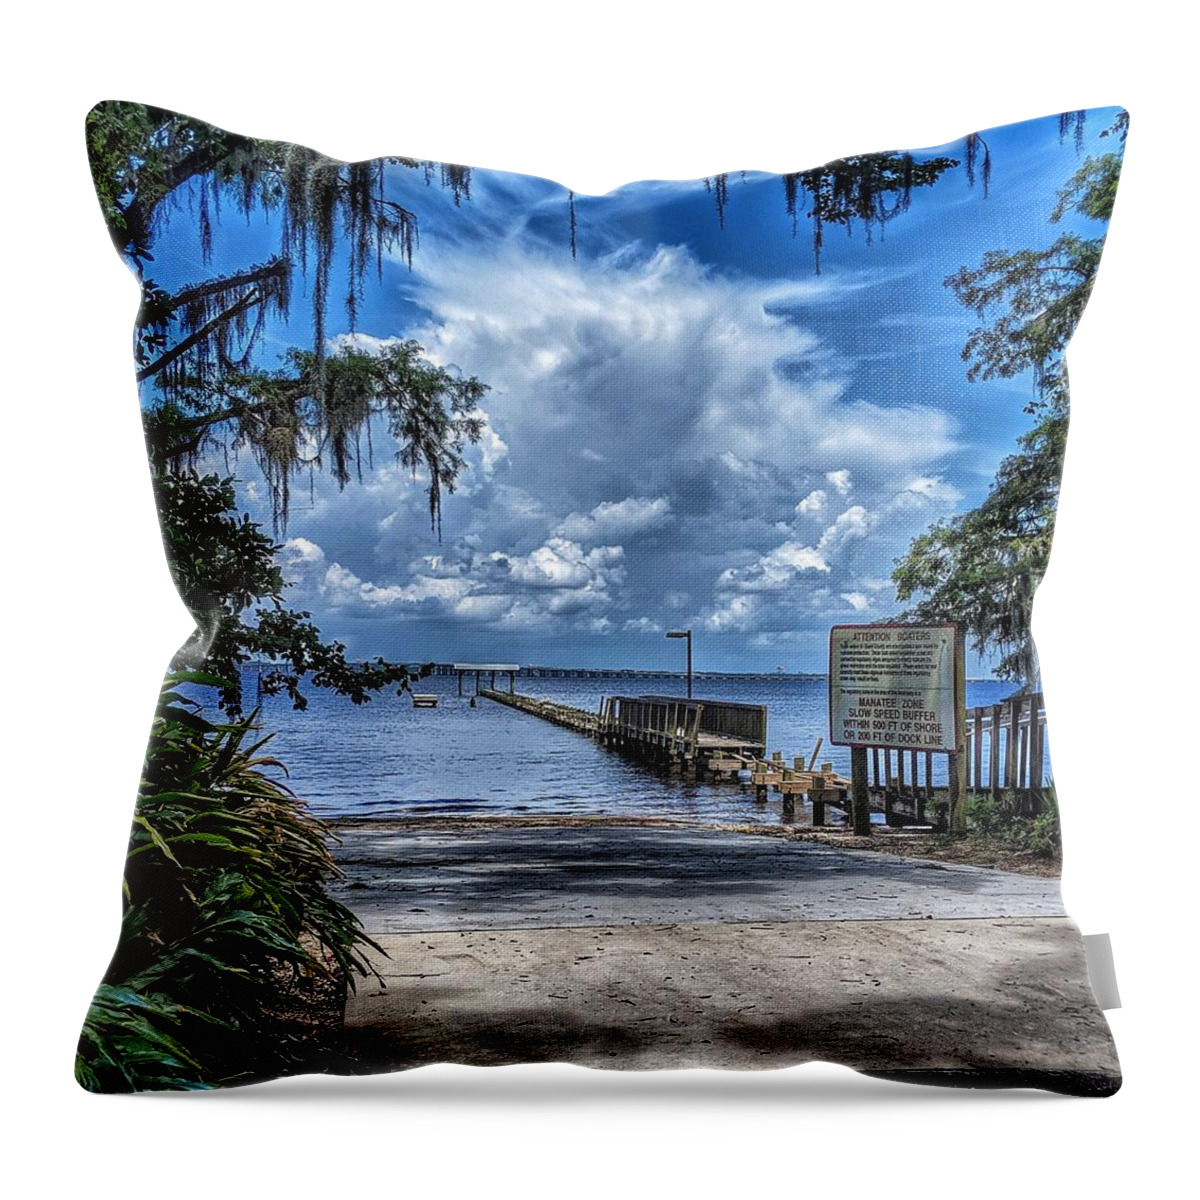 Clouds Throw Pillow featuring the photograph Strolling by the Dock by Portia Olaughlin